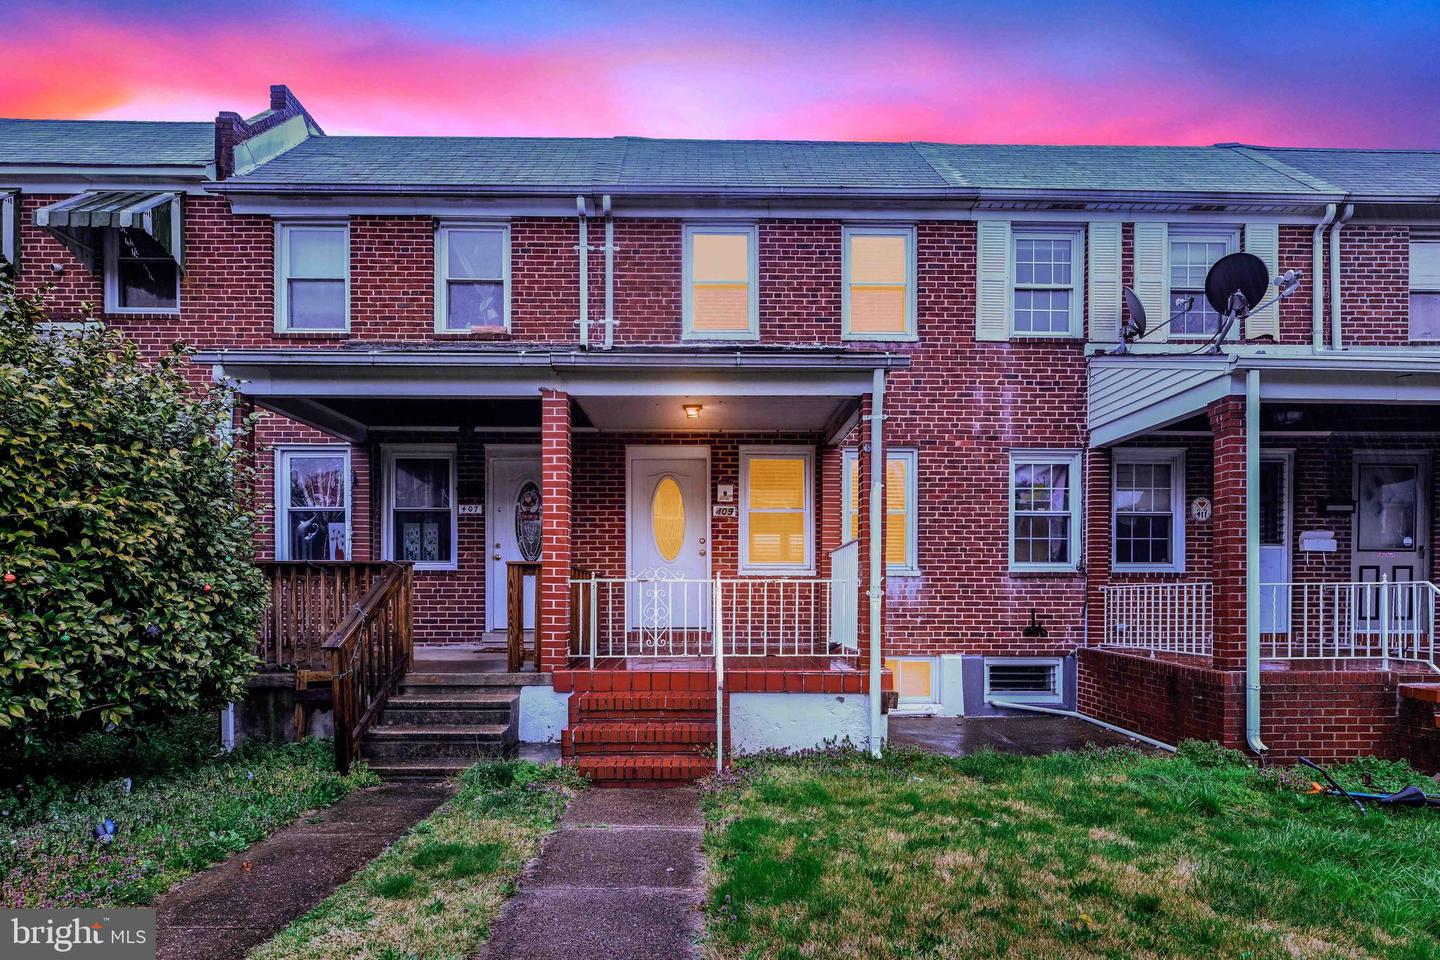 View Baltimore, MD 21224 townhome